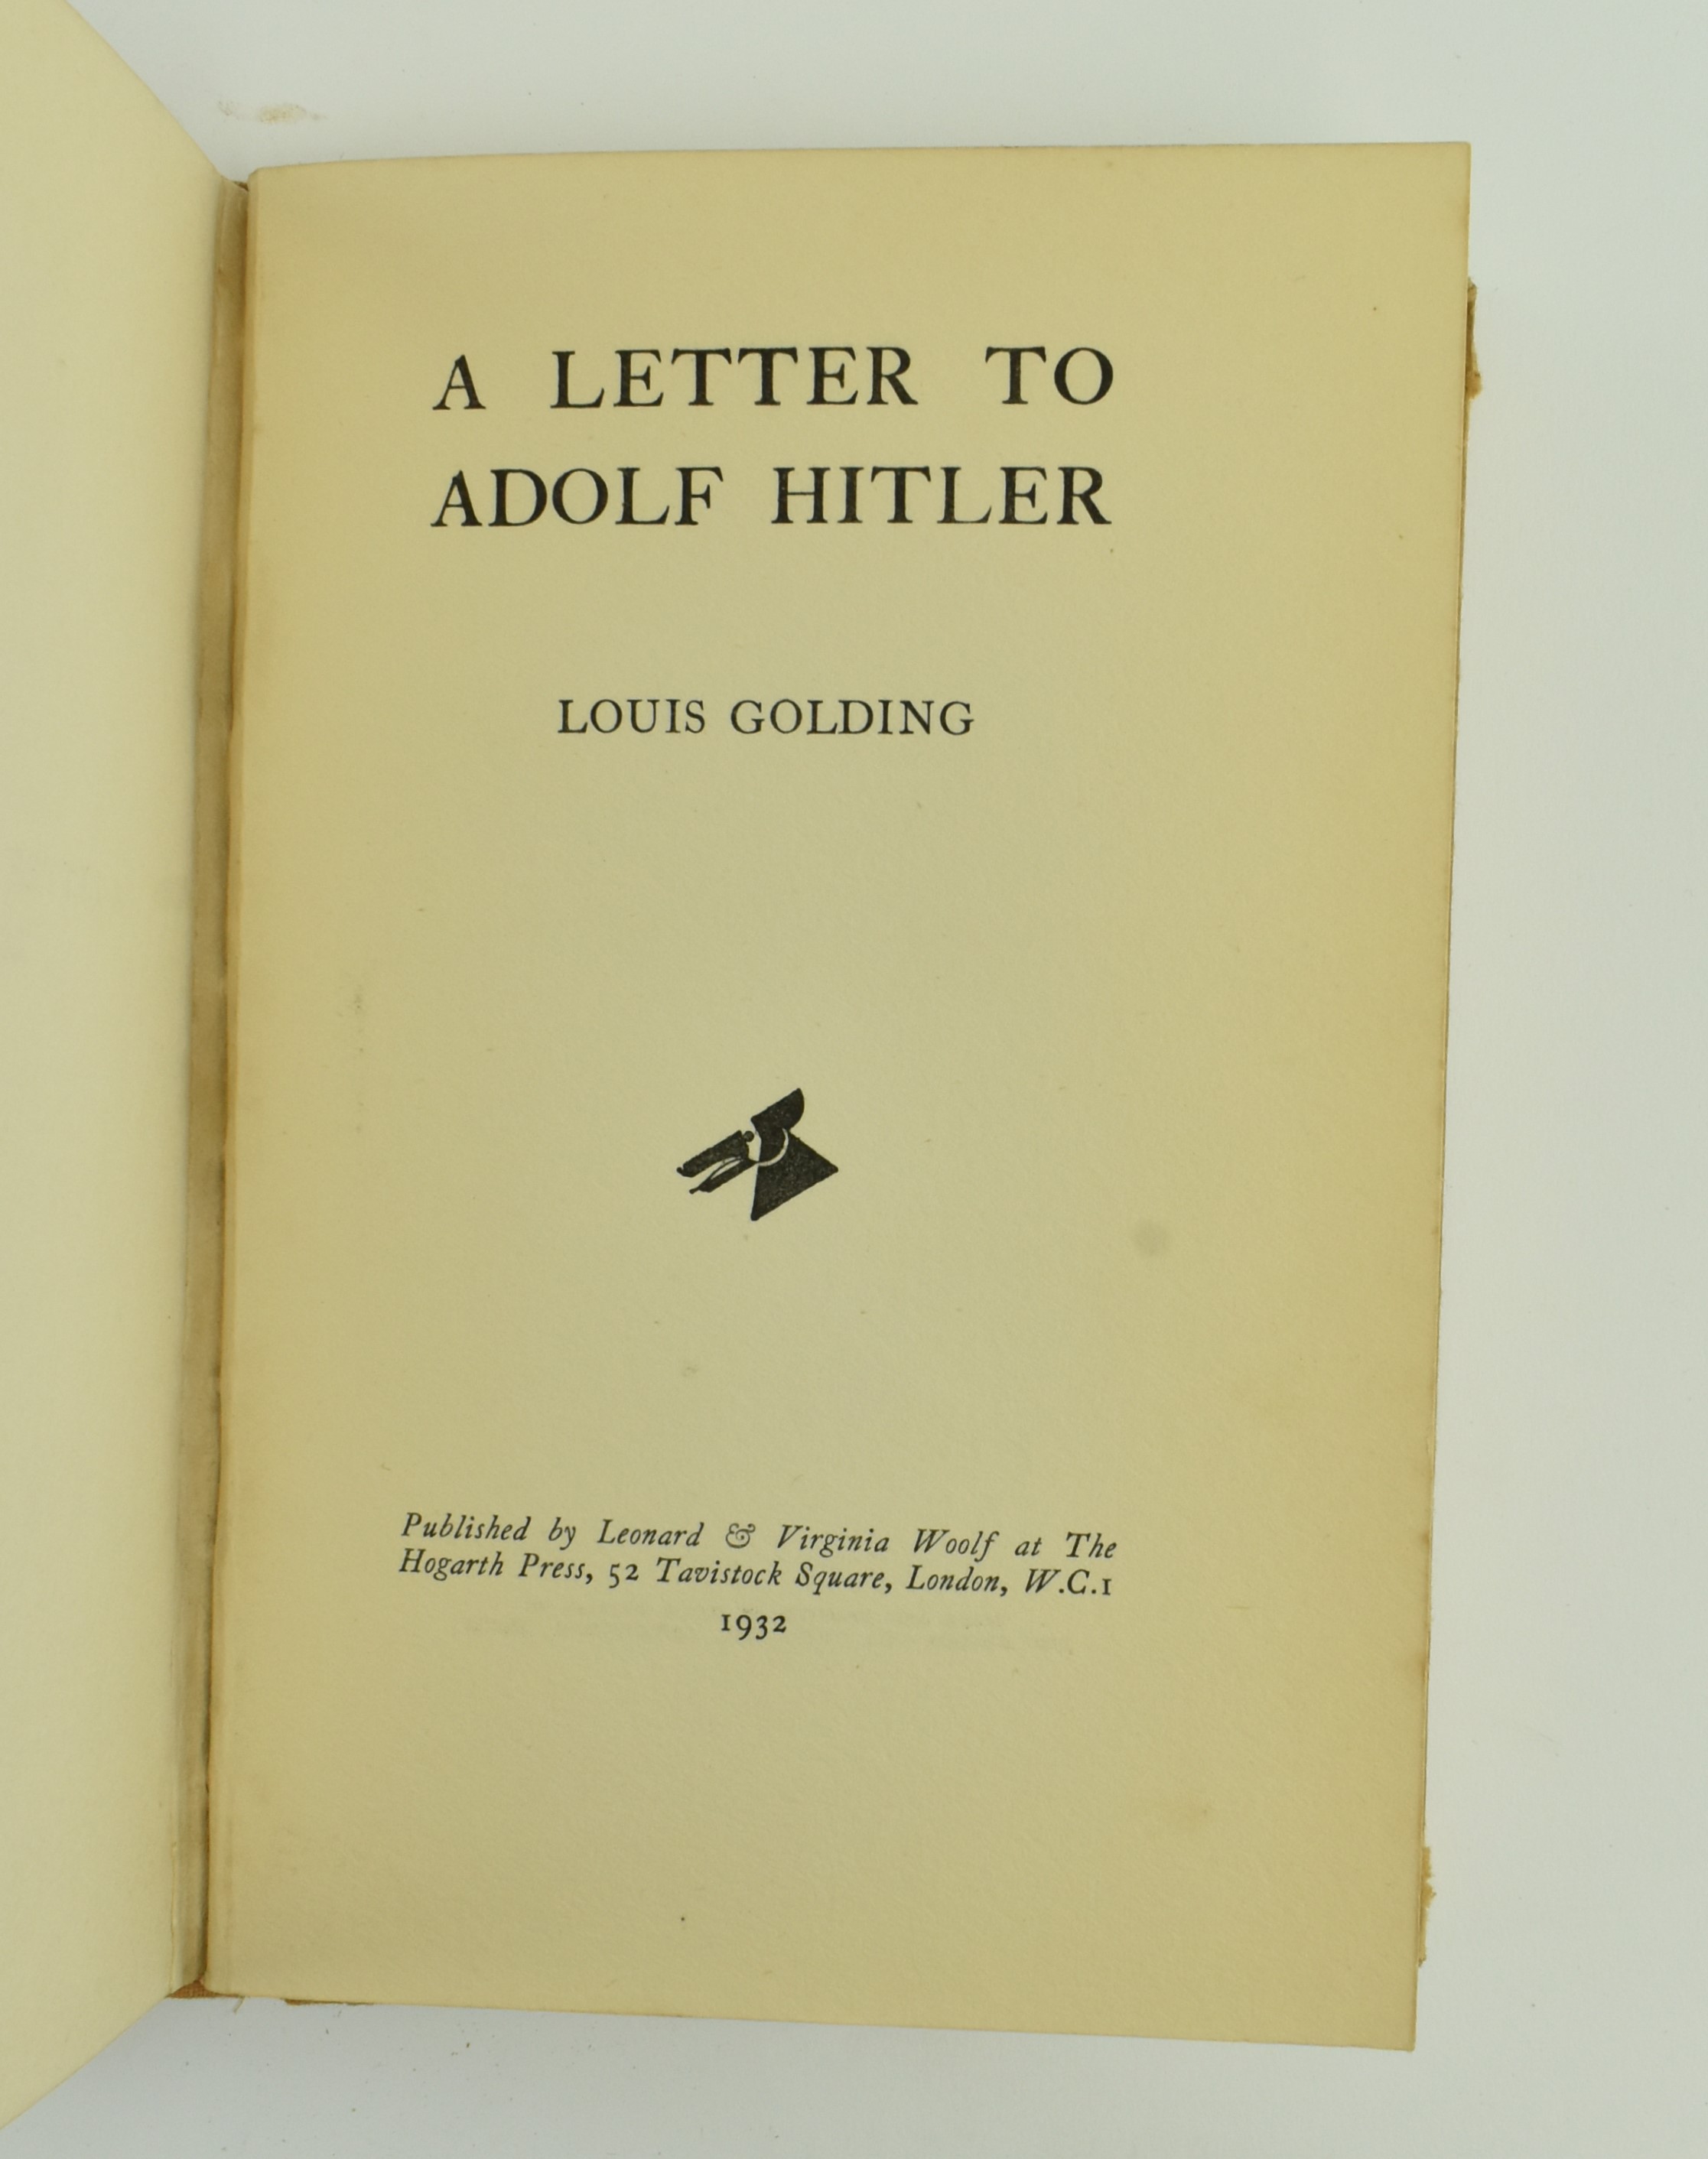 HOGARTH PRESS. 1933 THE HOGARTH LETTERS, ONE OF 500 COPIES - Image 7 of 7